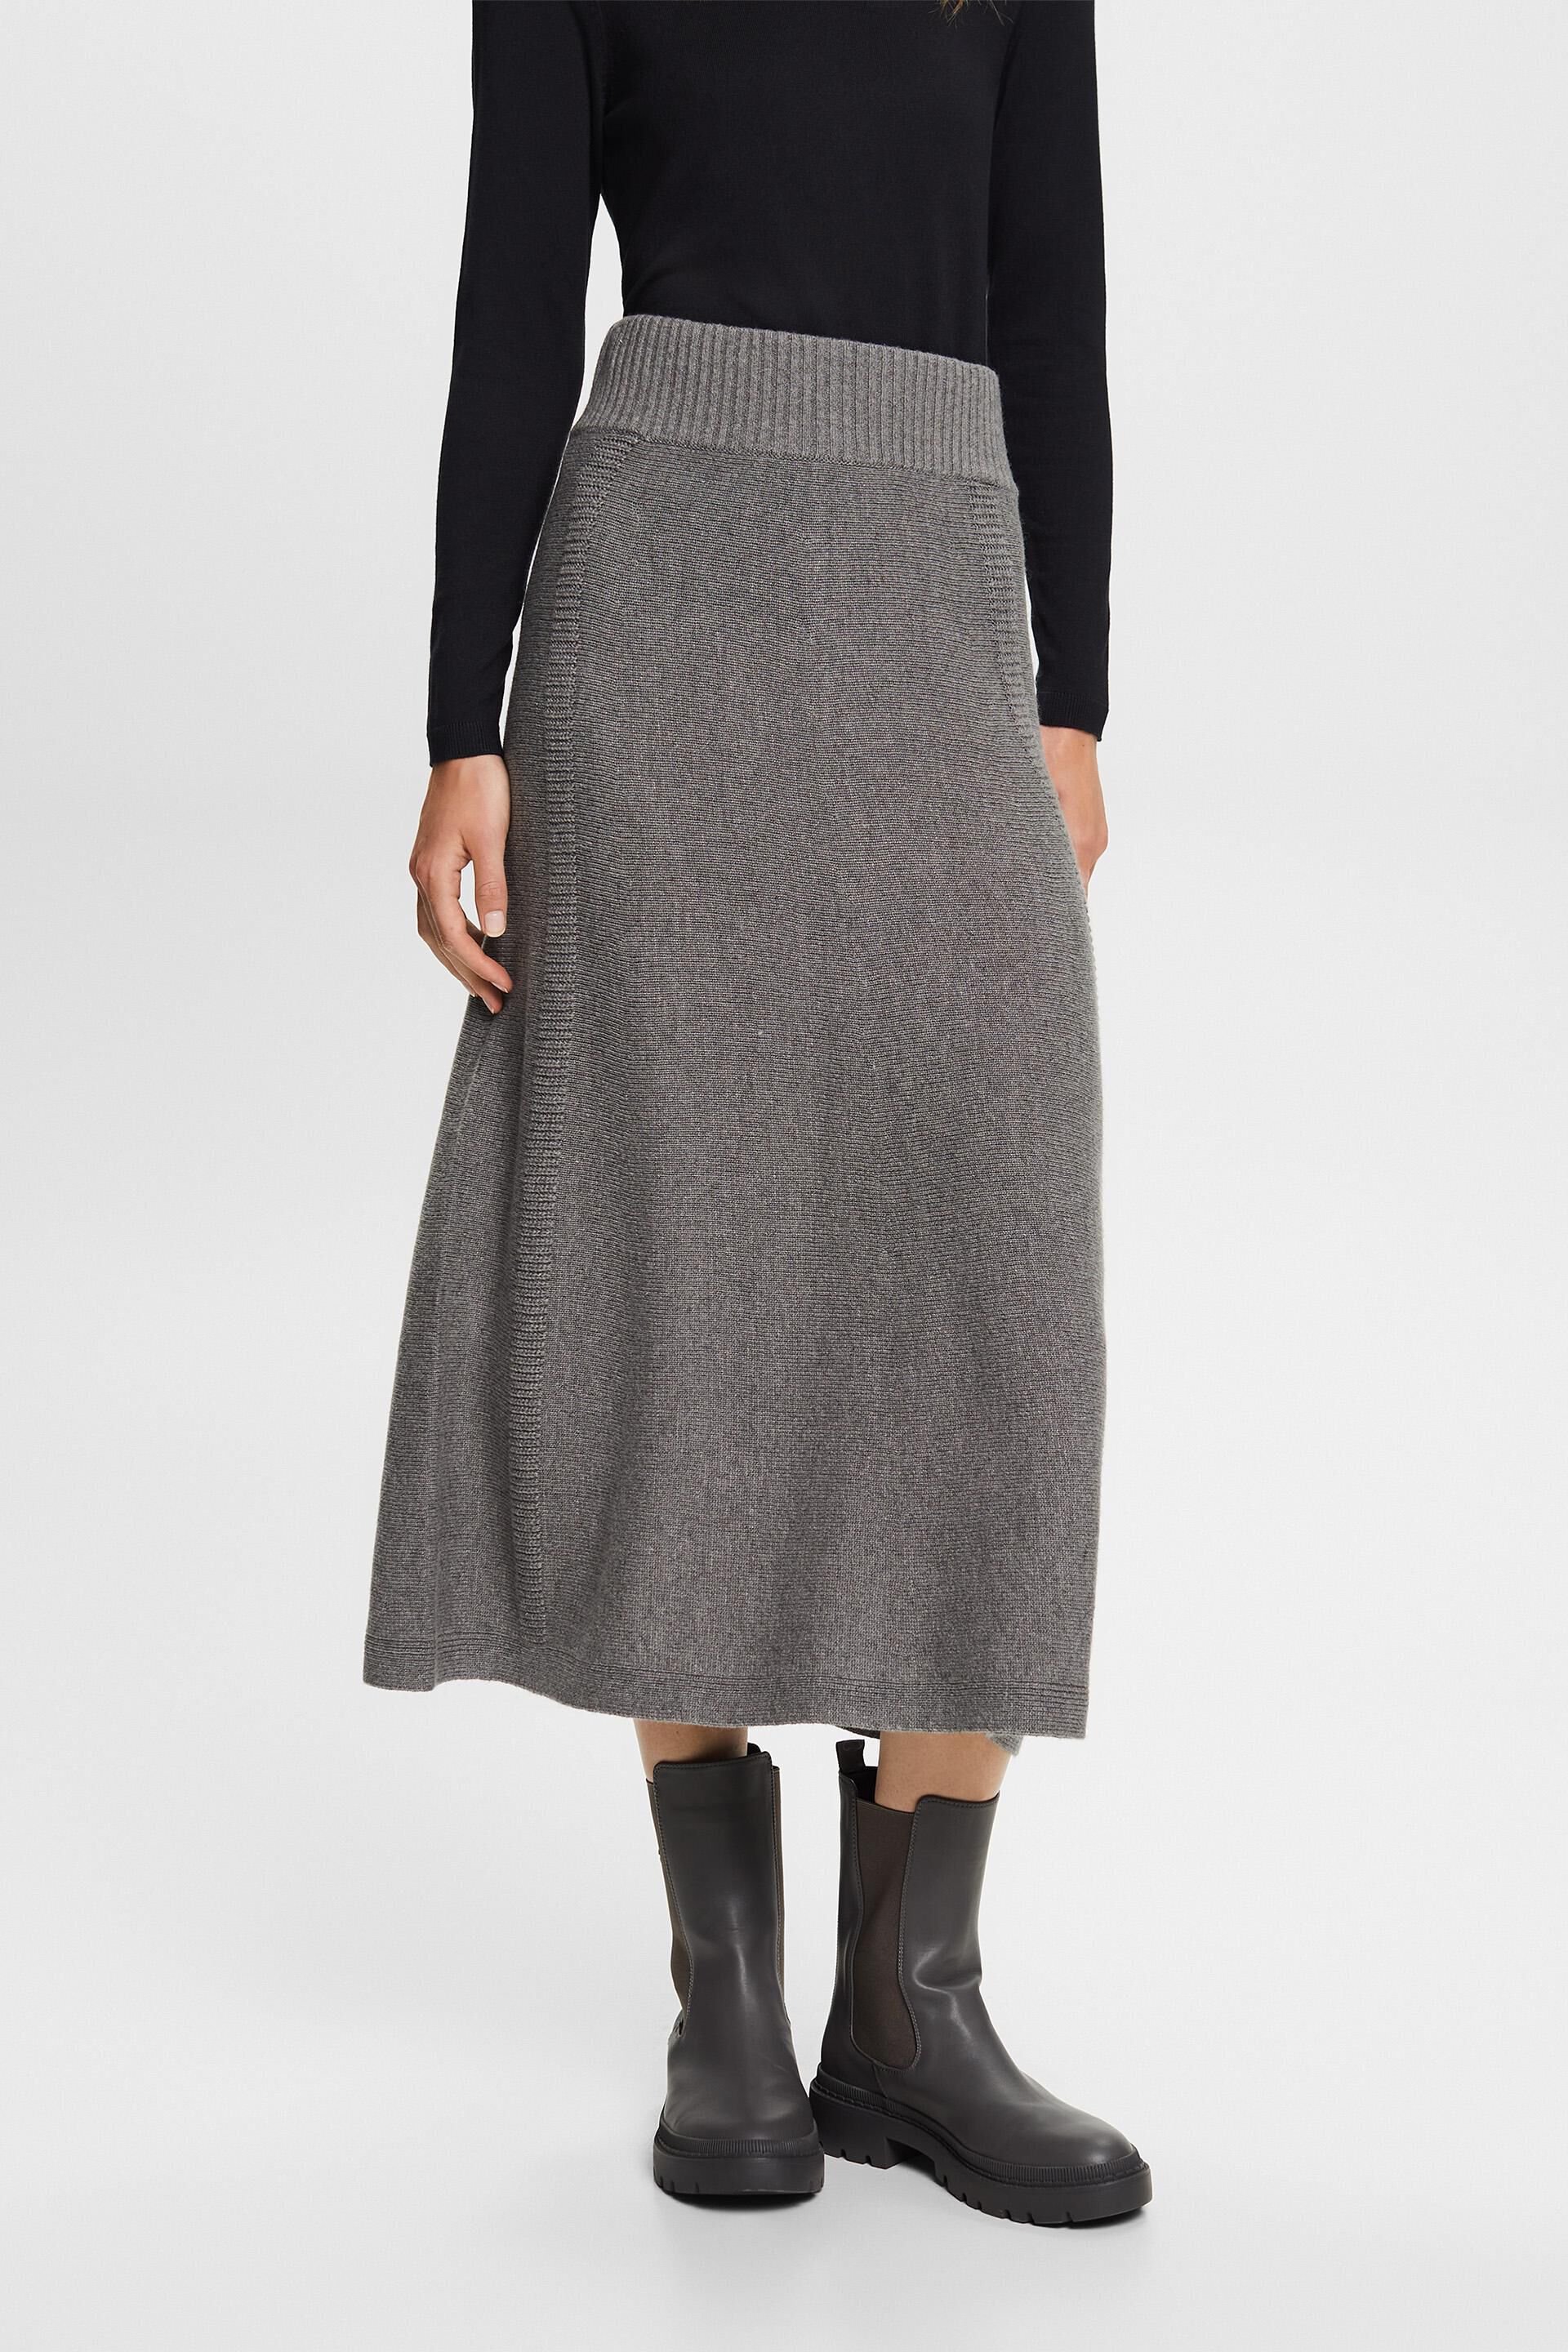 Esprit knitted Skirts flat